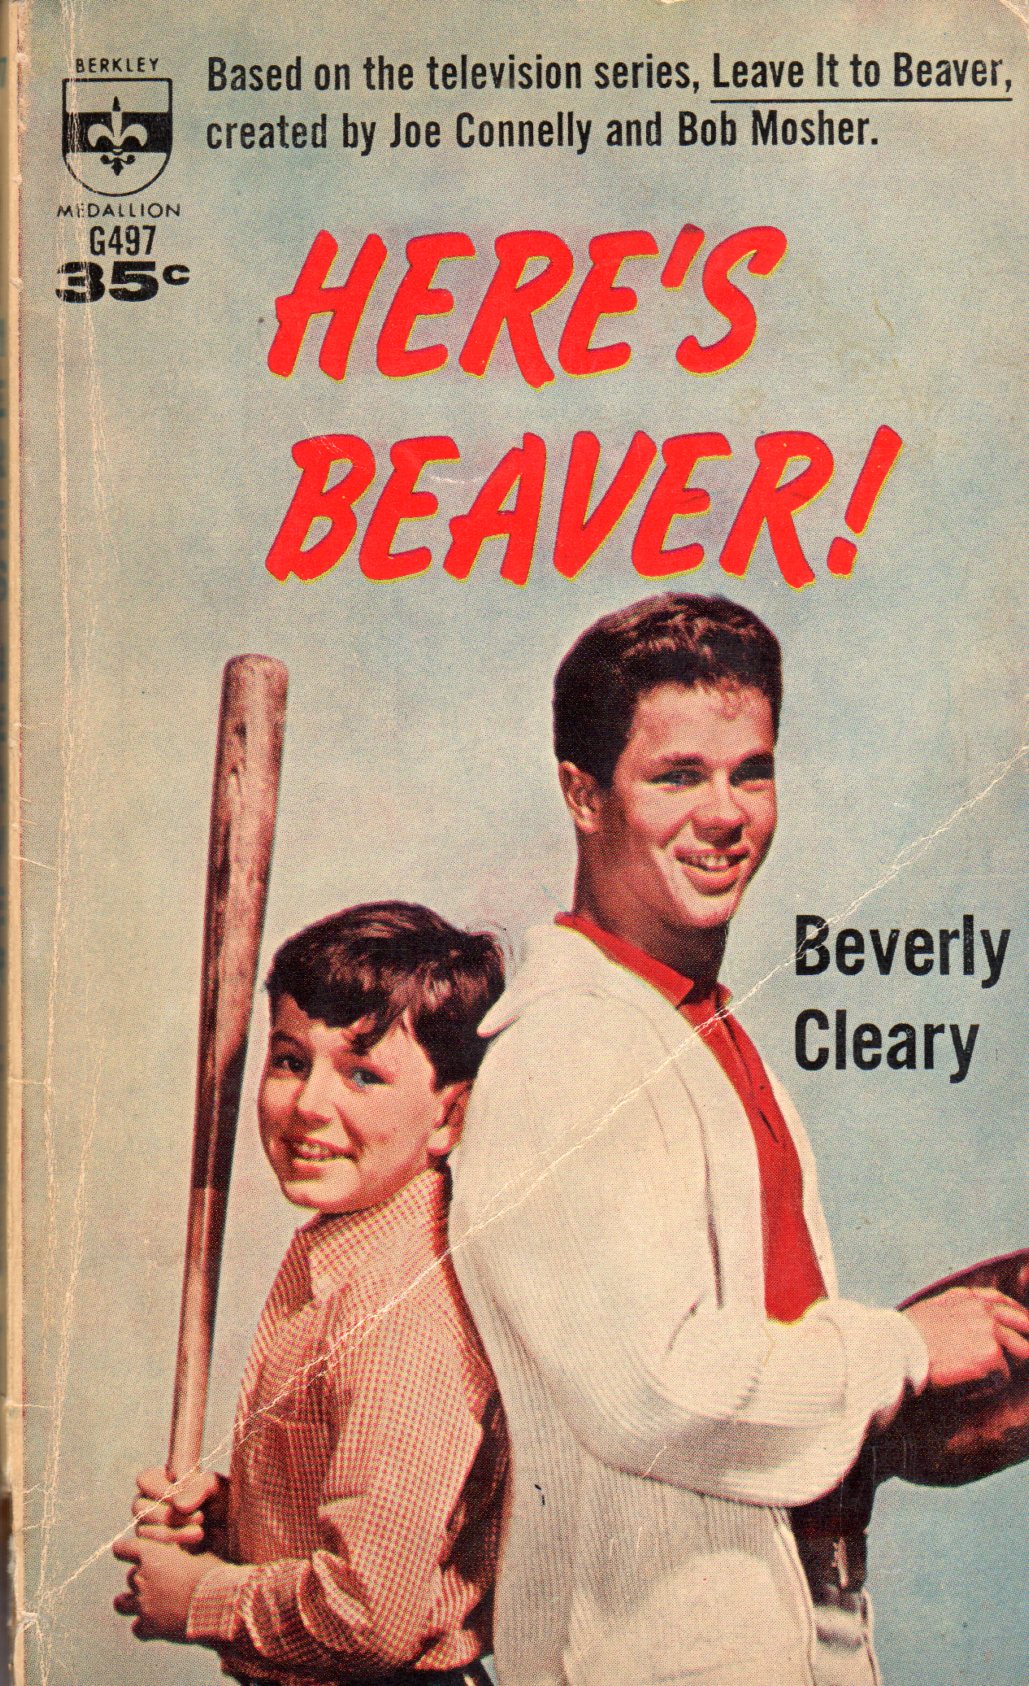 Based on the television series, Leave it to Beaver, created by Joe Connelly...